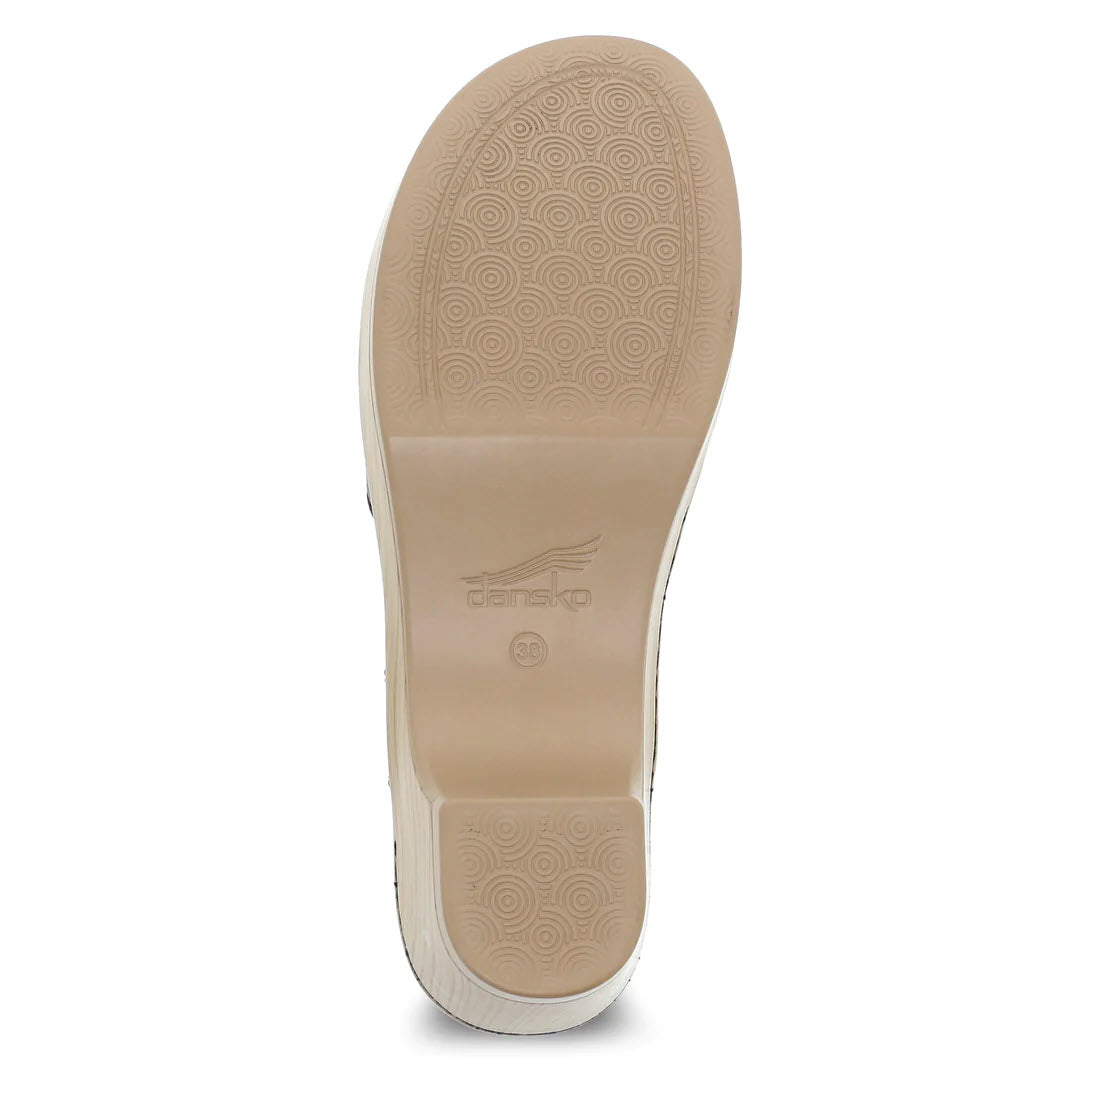 View of the sole of a light brown Dansko leather sandal, displayed vertically and featuring circular grip patterns and a logo imprint.